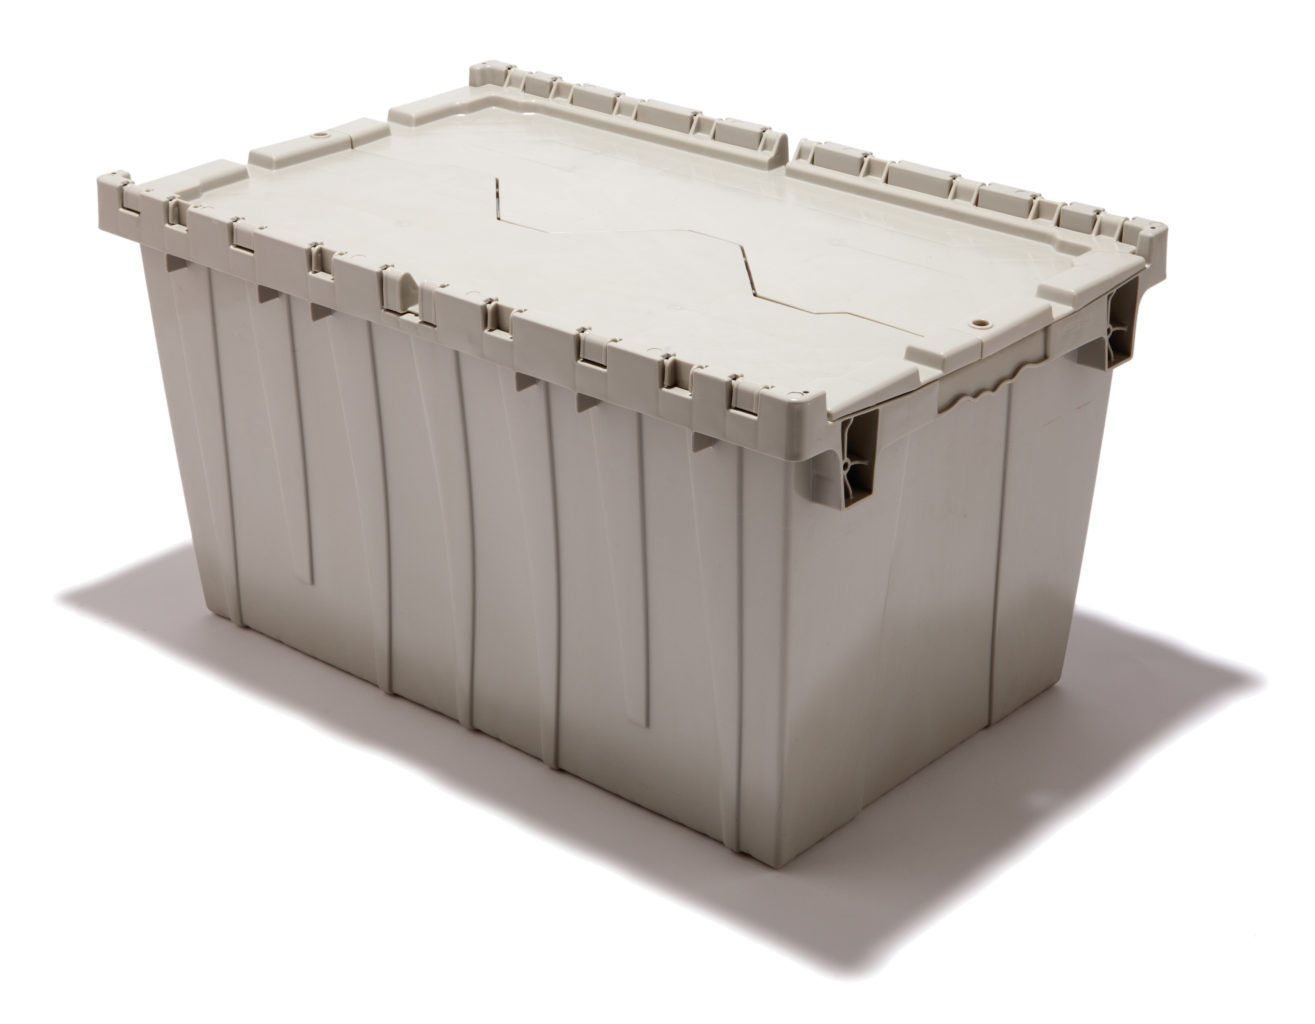 28 x 20 x 15 – Handheld Attached Lid Container